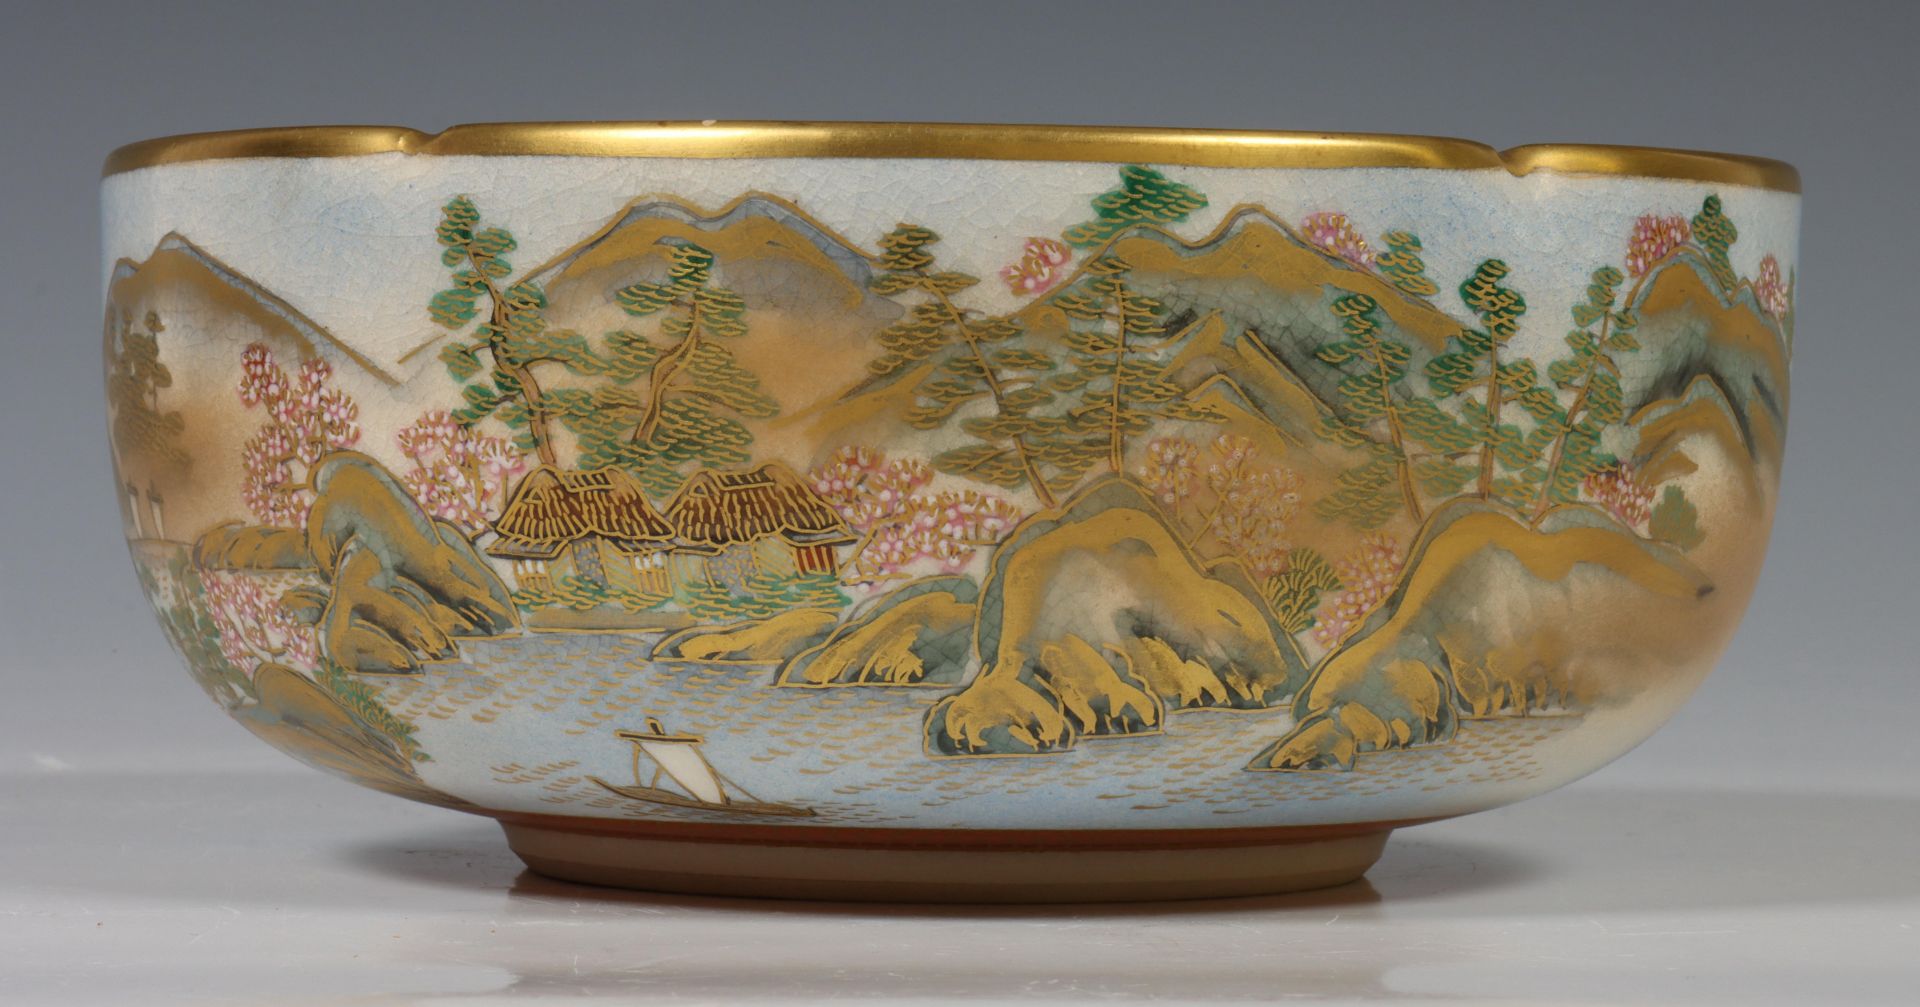 Japan, Satsuma porcelain bowl, 20th century, decorated to the interior with pavilion with mount Fuji - Image 4 of 8